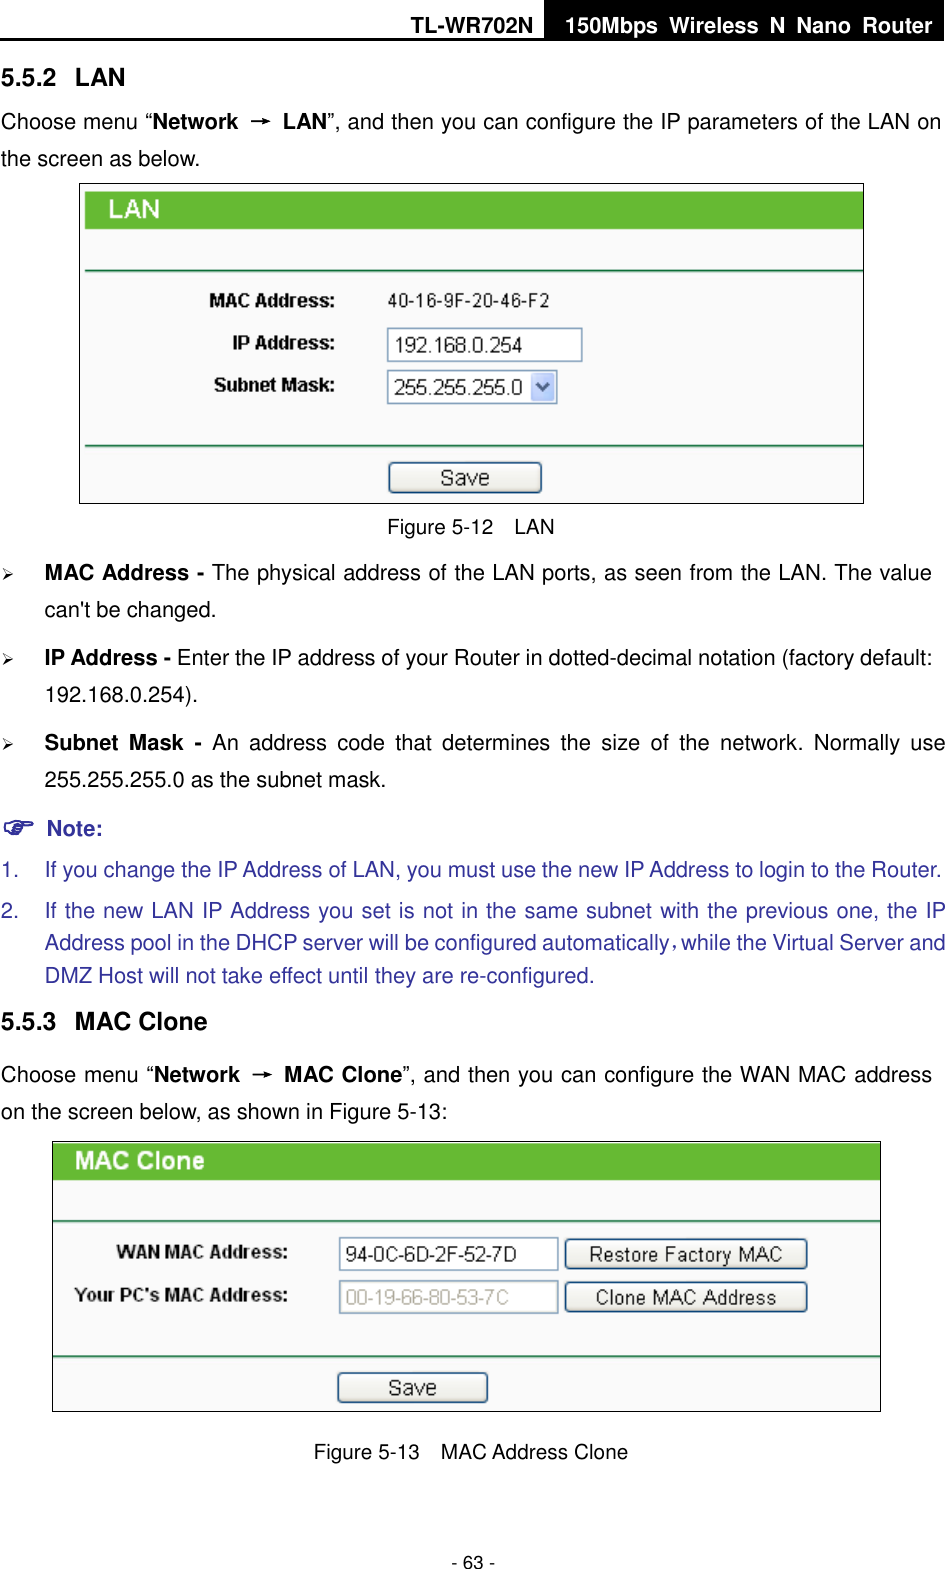 TL-WR702N 150Mbps  Wireless  N  Nano  Router  - 63 - 5.5.2  LAN Choose menu “Network  →  LAN”, and then you can configure the IP parameters of the LAN on the screen as below.  Figure 5-12  LAN  MAC Address - The physical address of the LAN ports, as seen from the LAN. The value can&apos;t be changed.  IP Address - Enter the IP address of your Router in dotted-decimal notation (factory default: 192.168.0.254).  Subnet  Mask  -  An  address  code  that  determines  the  size  of  the  network.  Normally  use 255.255.255.0 as the subnet mask.    Note: 1.  If you change the IP Address of LAN, you must use the new IP Address to login to the Router.   2.  If the new LAN IP Address you set is not in the same subnet with the previous one, the IP Address pool in the DHCP server will be configured automatically，while the Virtual Server and DMZ Host will not take effect until they are re-configured. 5.5.3  MAC Clone Choose menu “Network  →  MAC Clone”, and then you can configure the WAN MAC address on the screen below, as shown in Figure 5-13:  Figure 5-13  MAC Address Clone 